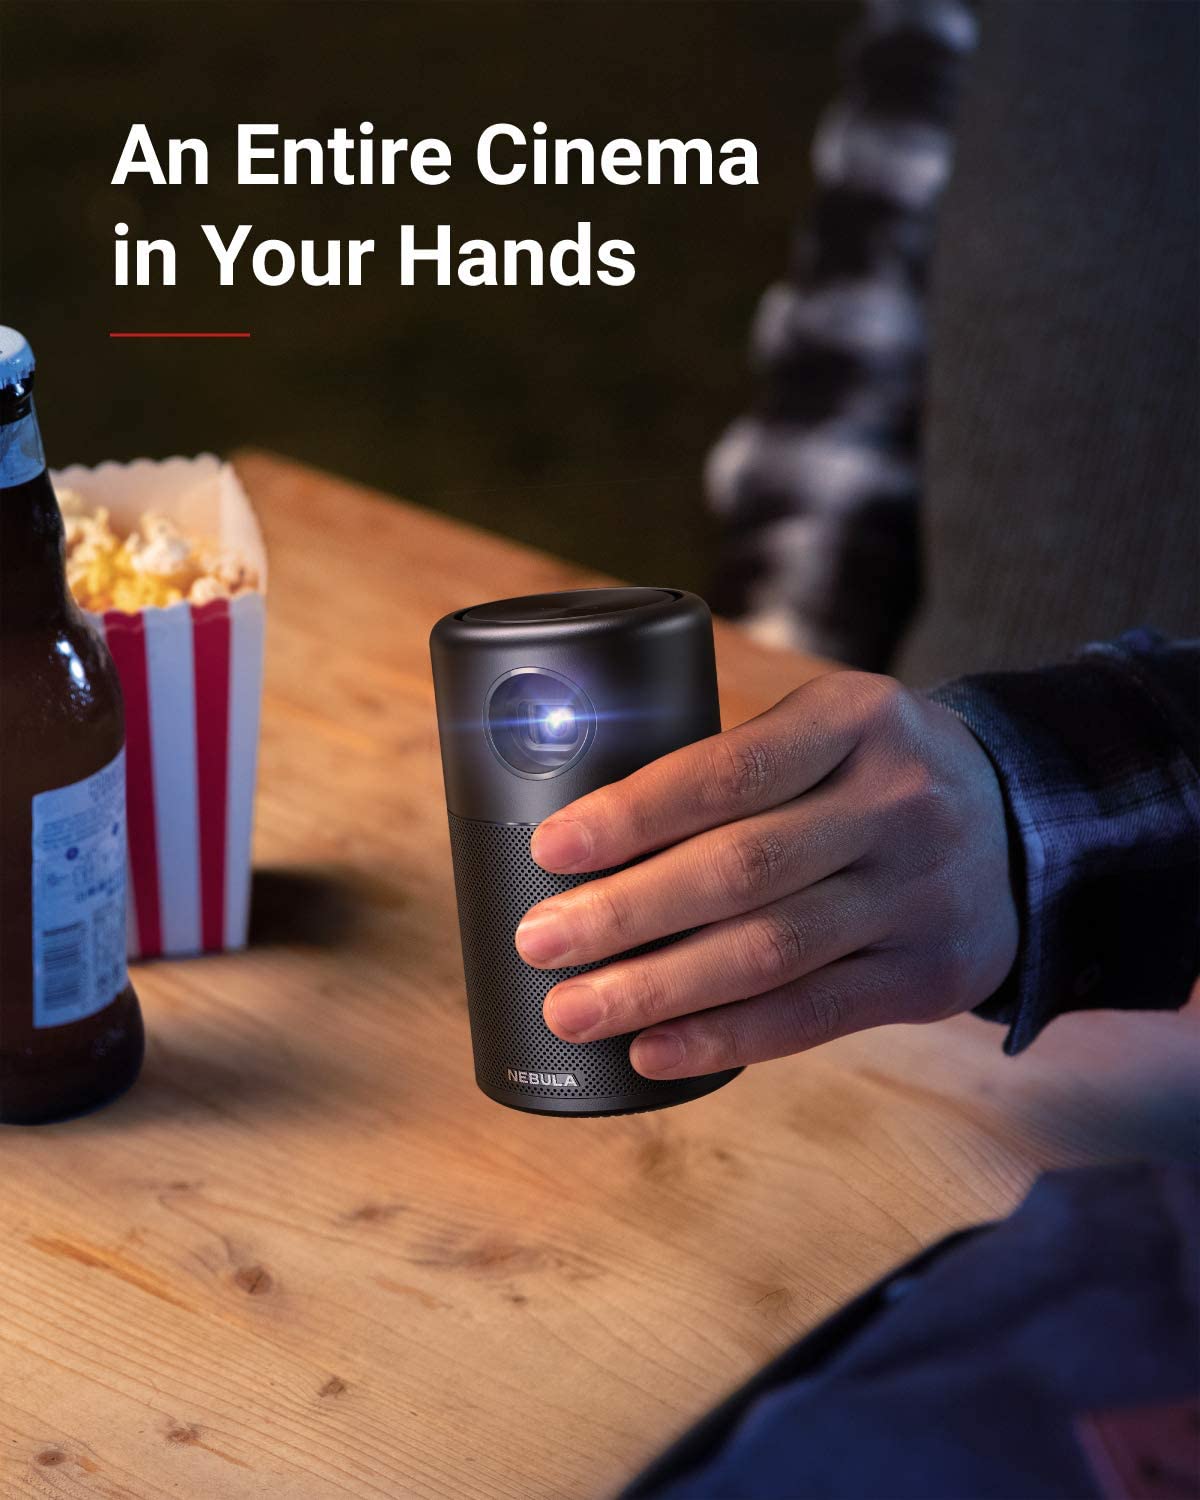 A hand holds a Nebula Capsule portable projector above a table with a bag of popcorn and a bottle of beer.